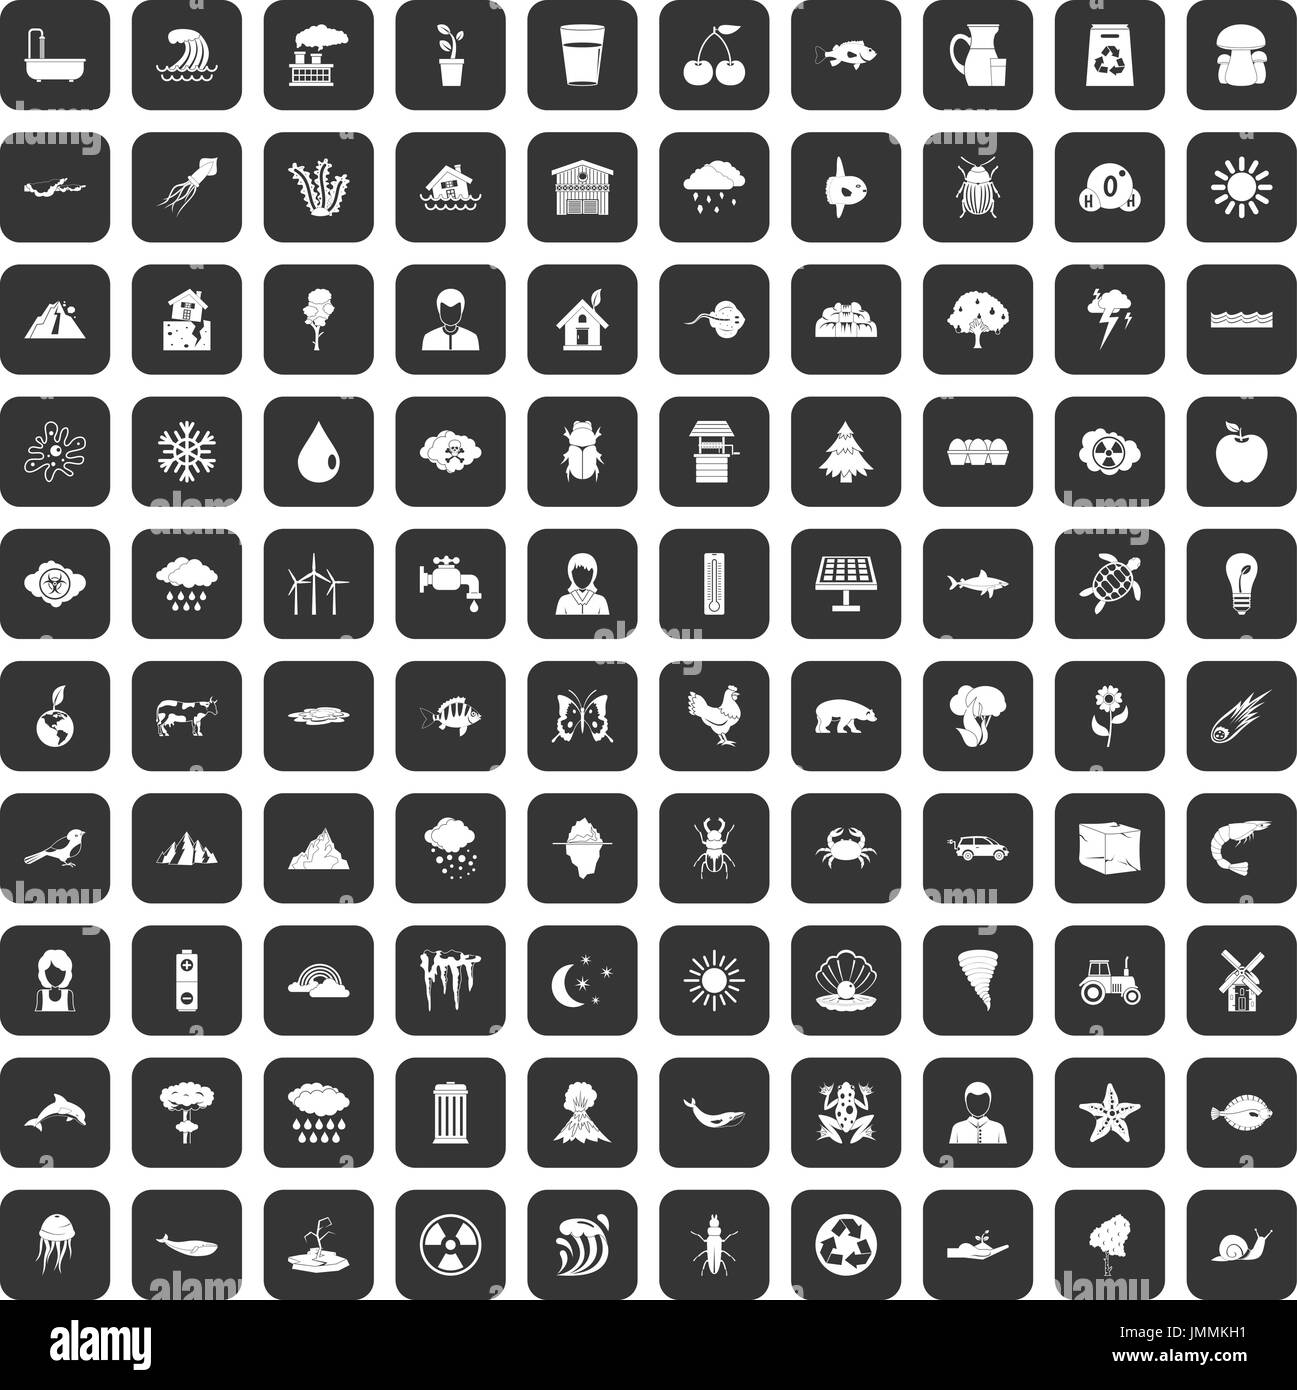 100 earth icons set black Stock Vector